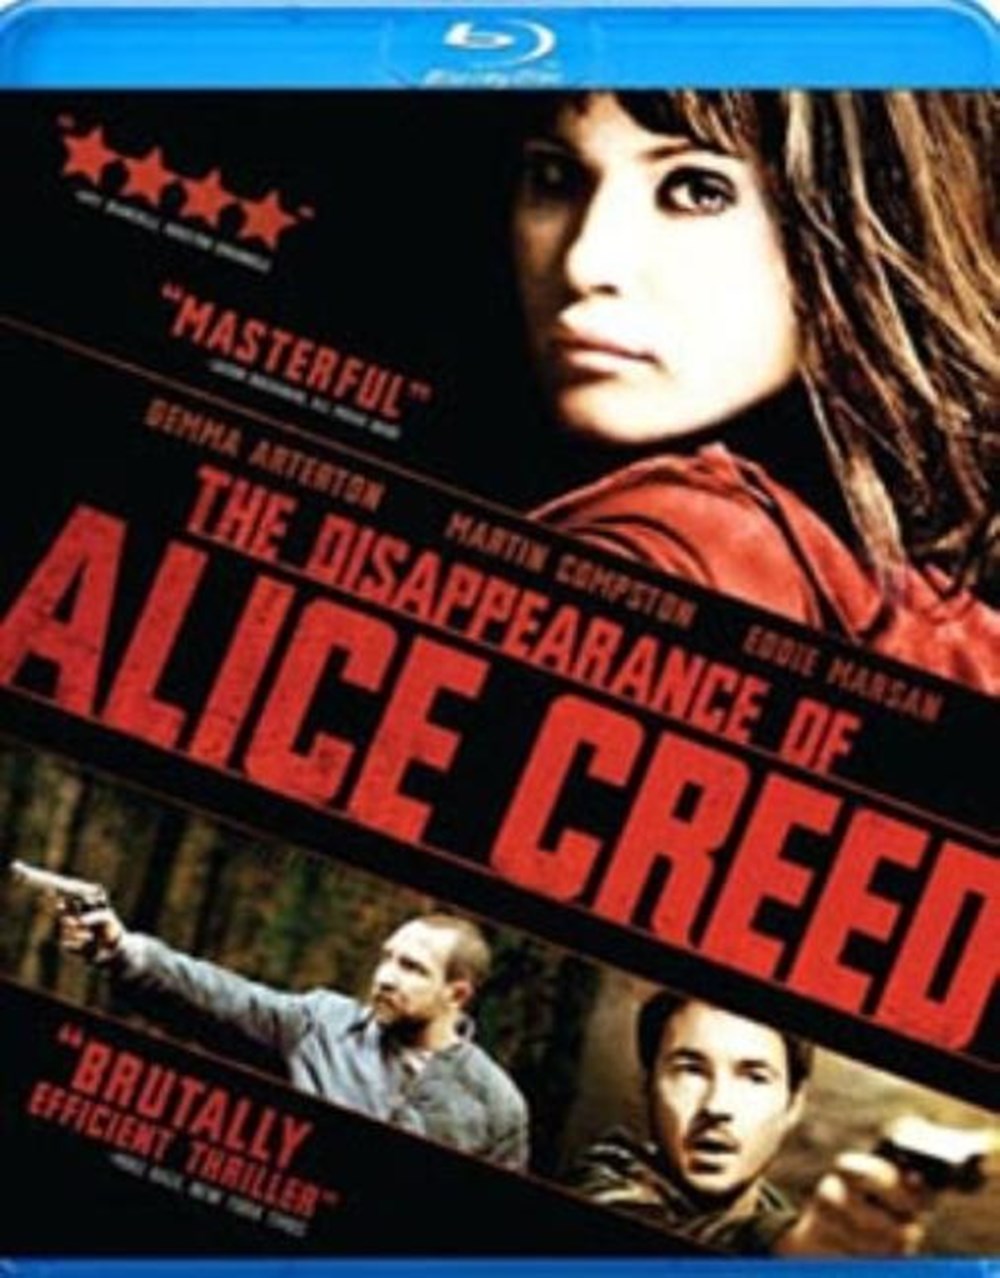 Disappearance of Alice Creed